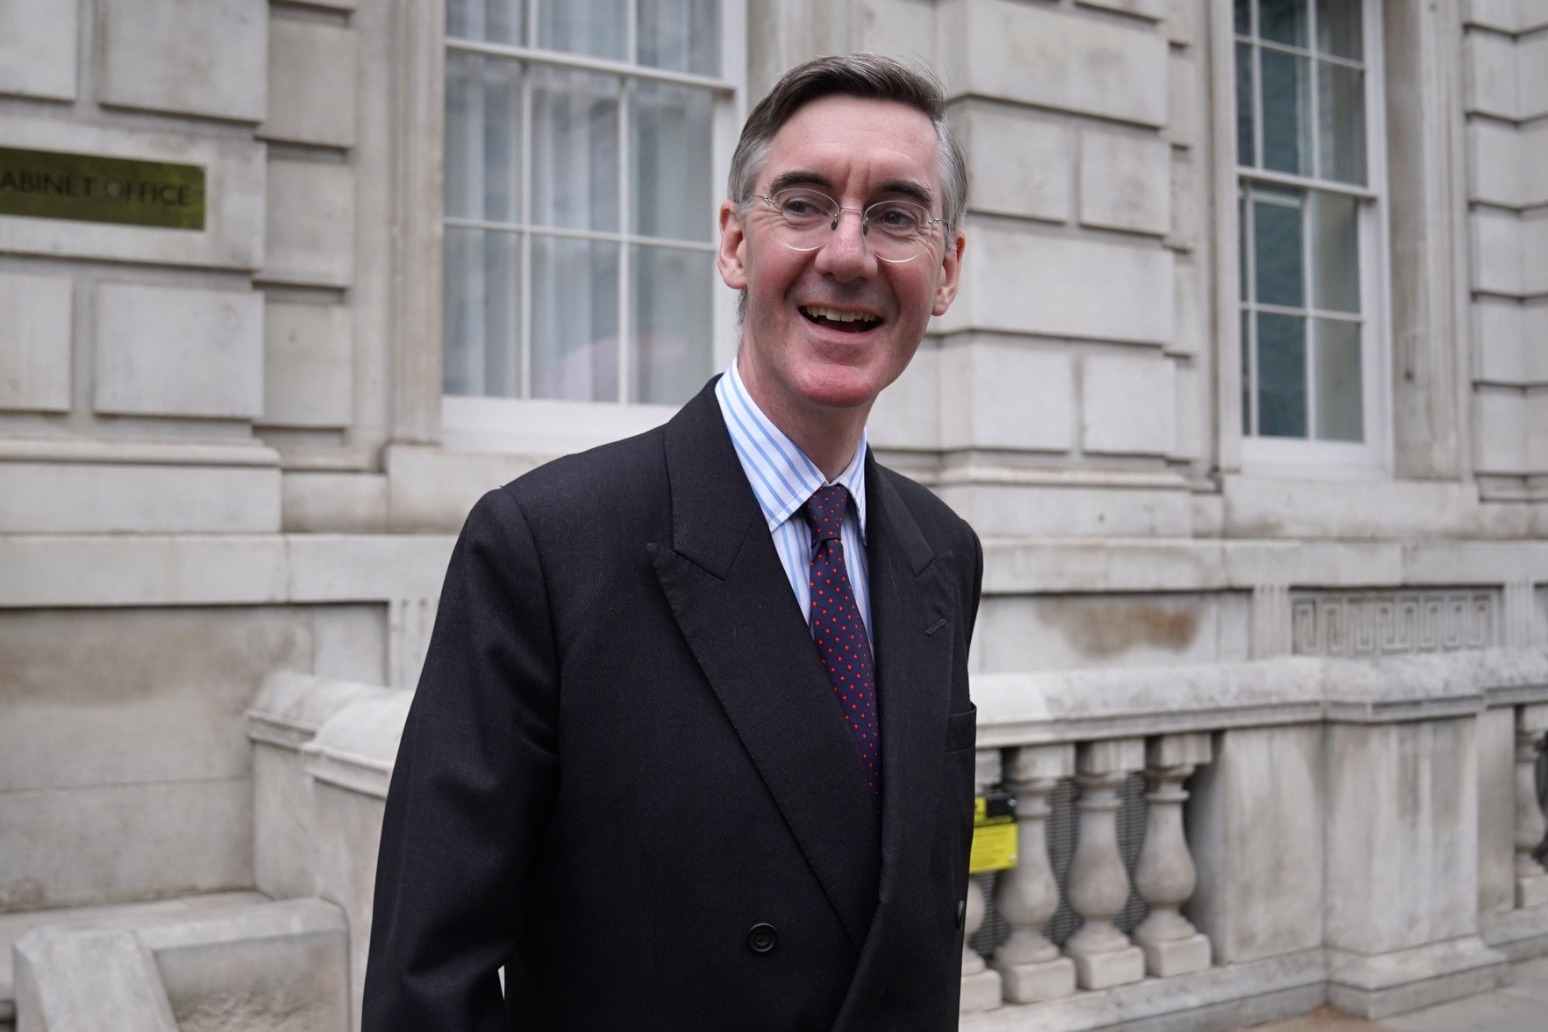 Jacob Rees-Mogg reveals ‘new strategy’ to sell off £1.5bn of London offices 